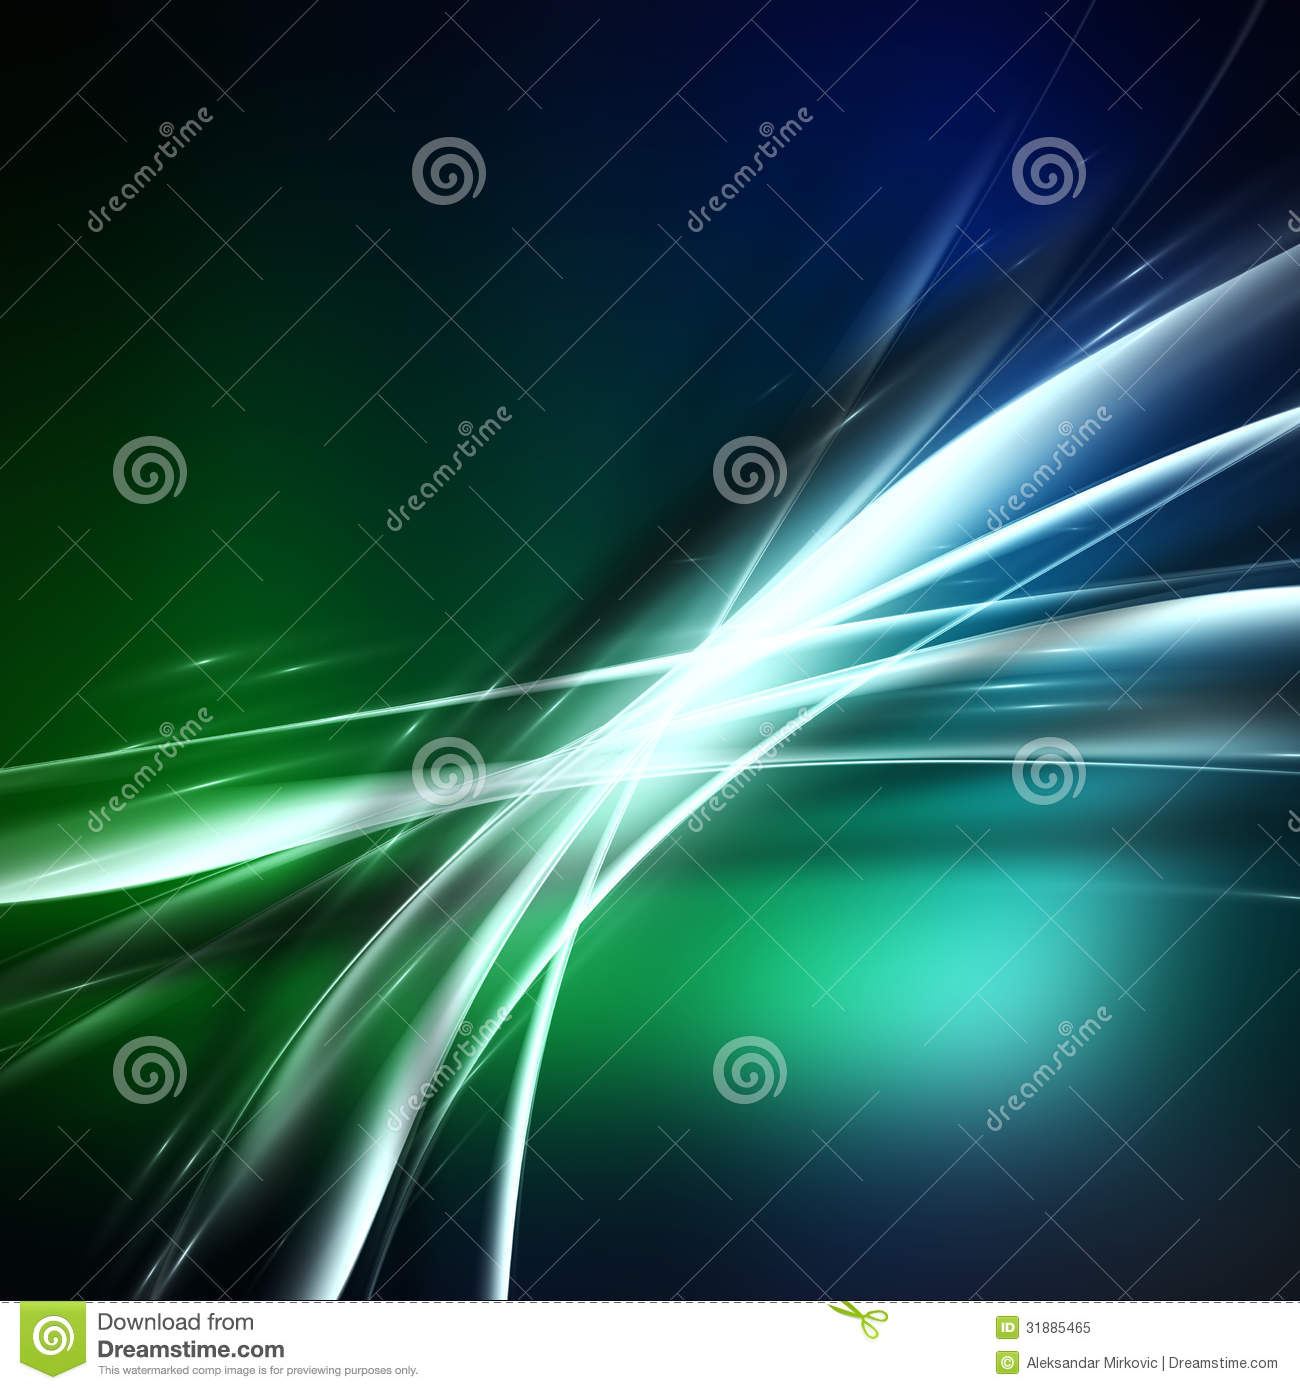 Abstract Background Royalty Free Stock Photo   Image  31885465